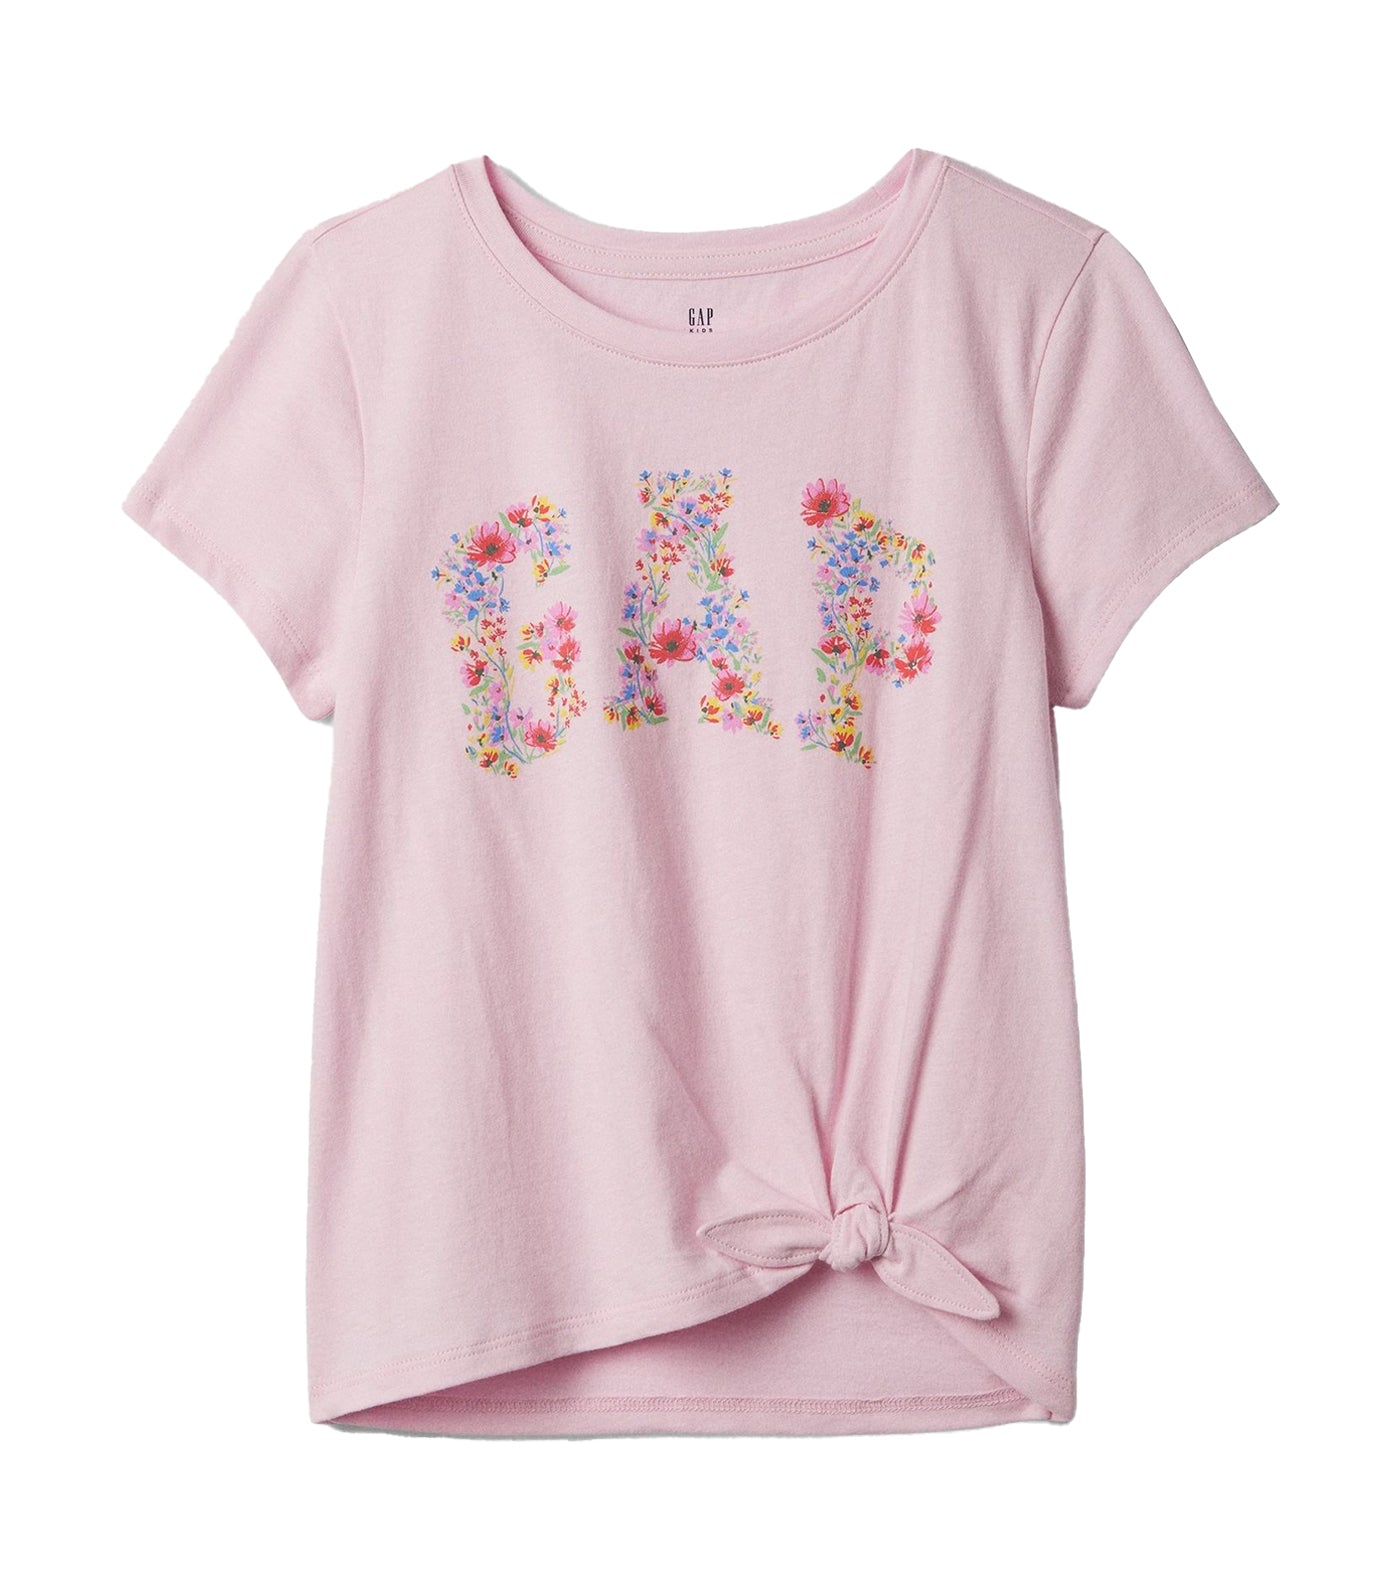 Kids Knot-Tie Graphic T-Shirt Sp Pink Floral